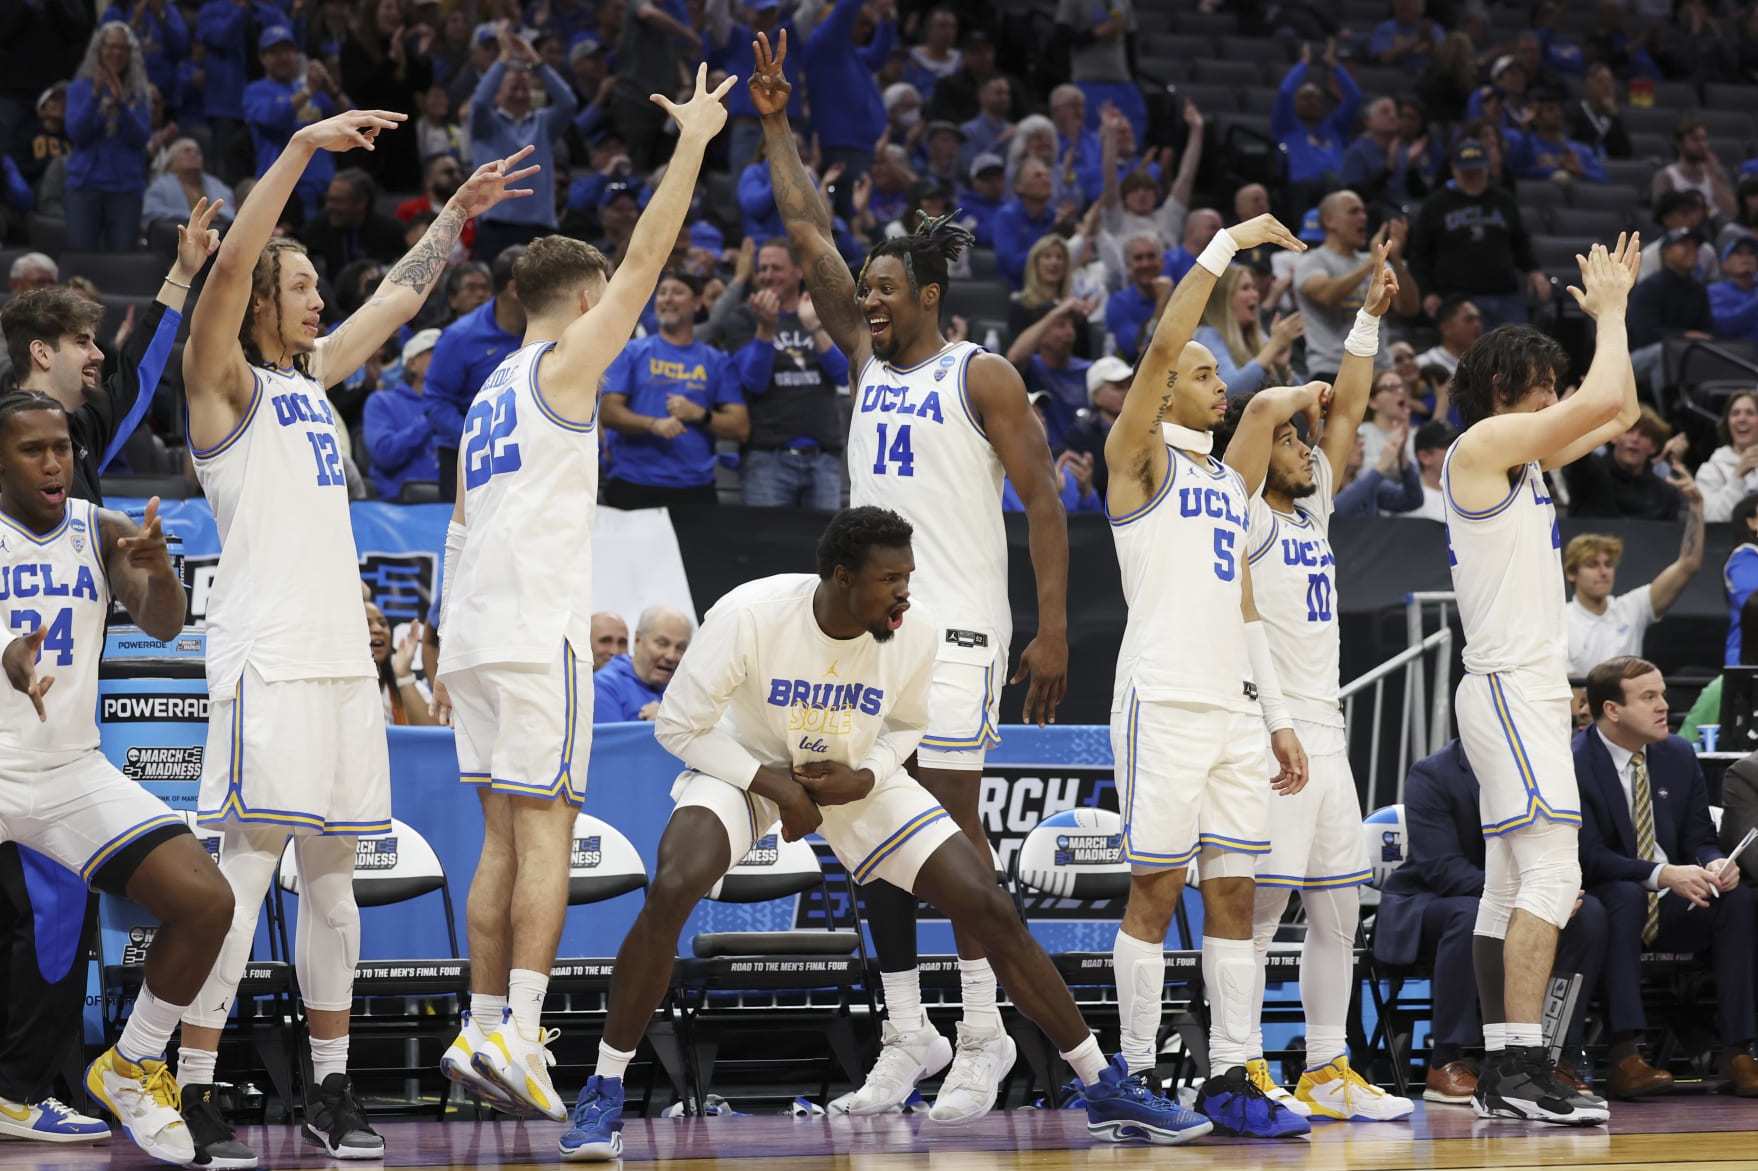 Friday Was A Step Down From Thursday's NCAA Tournament Action, But It Was  Still Historic - Duke Basketball Report